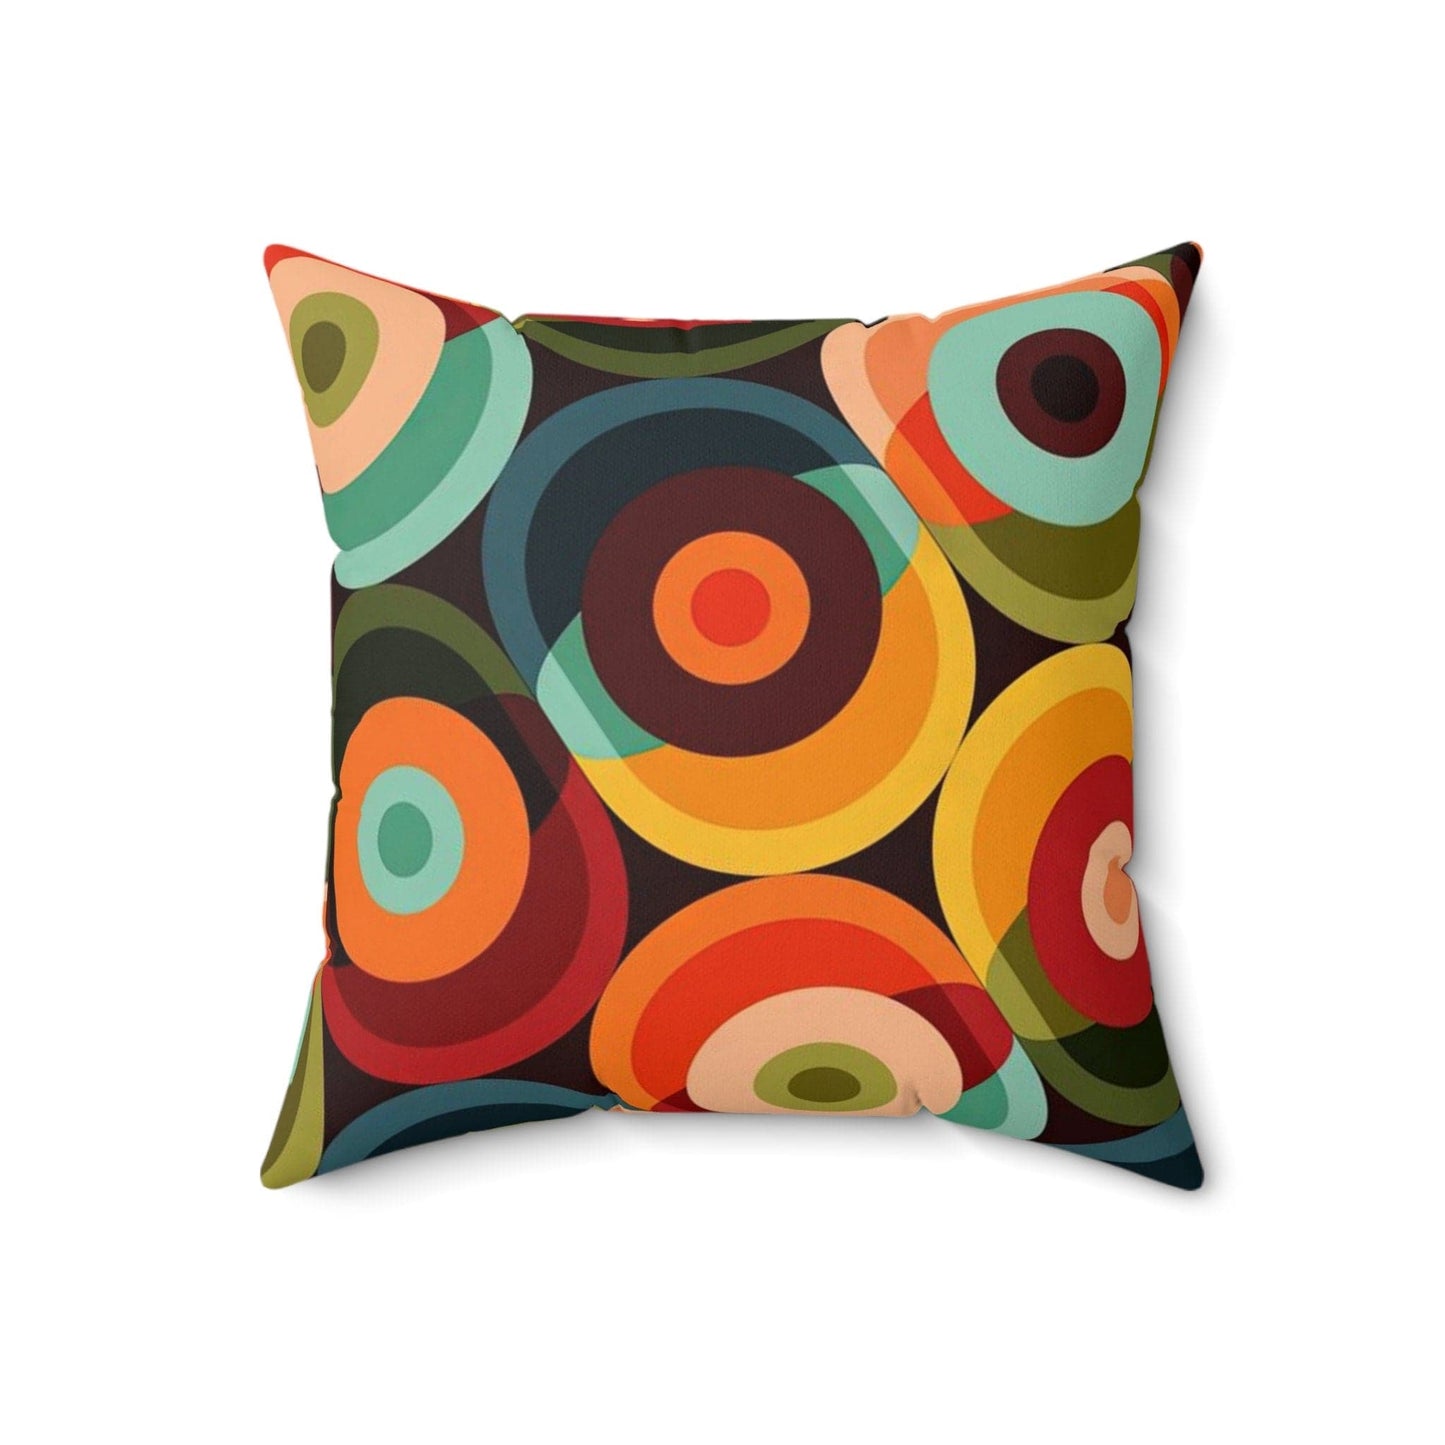 Kate McEnroe New York Retro Mid Mod Geo-Psychedelic Circles Throw Pillow, MCM Teal Orange, Yellow, Red Abstract Living Room, Bedroom Accent Pillow - 131282623 Throw Pillows